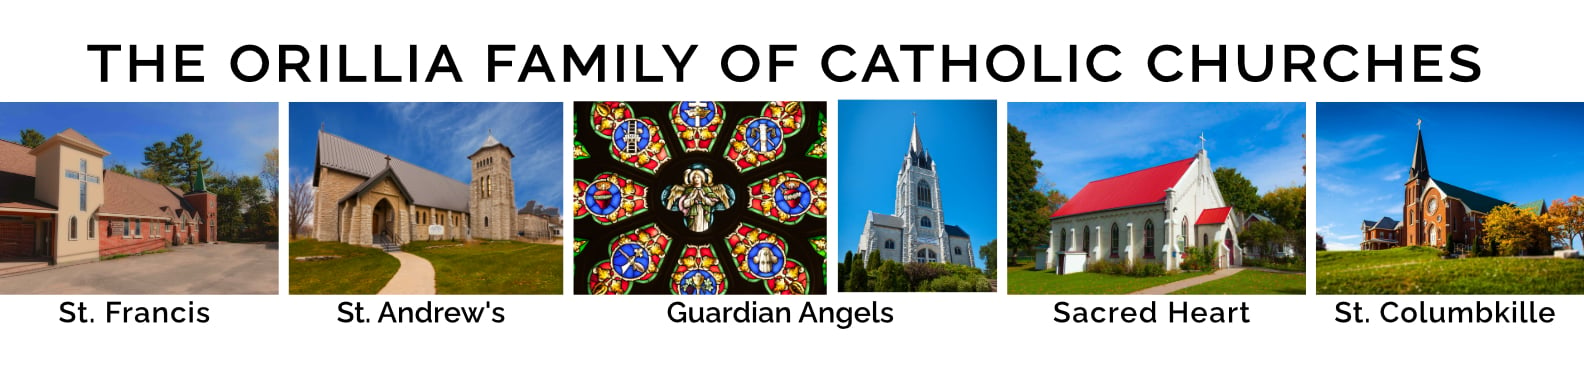 The Orillia Family of Churches St. Francis, St Andrews, Guardian Angels, Sacred Heart, St Columbkille